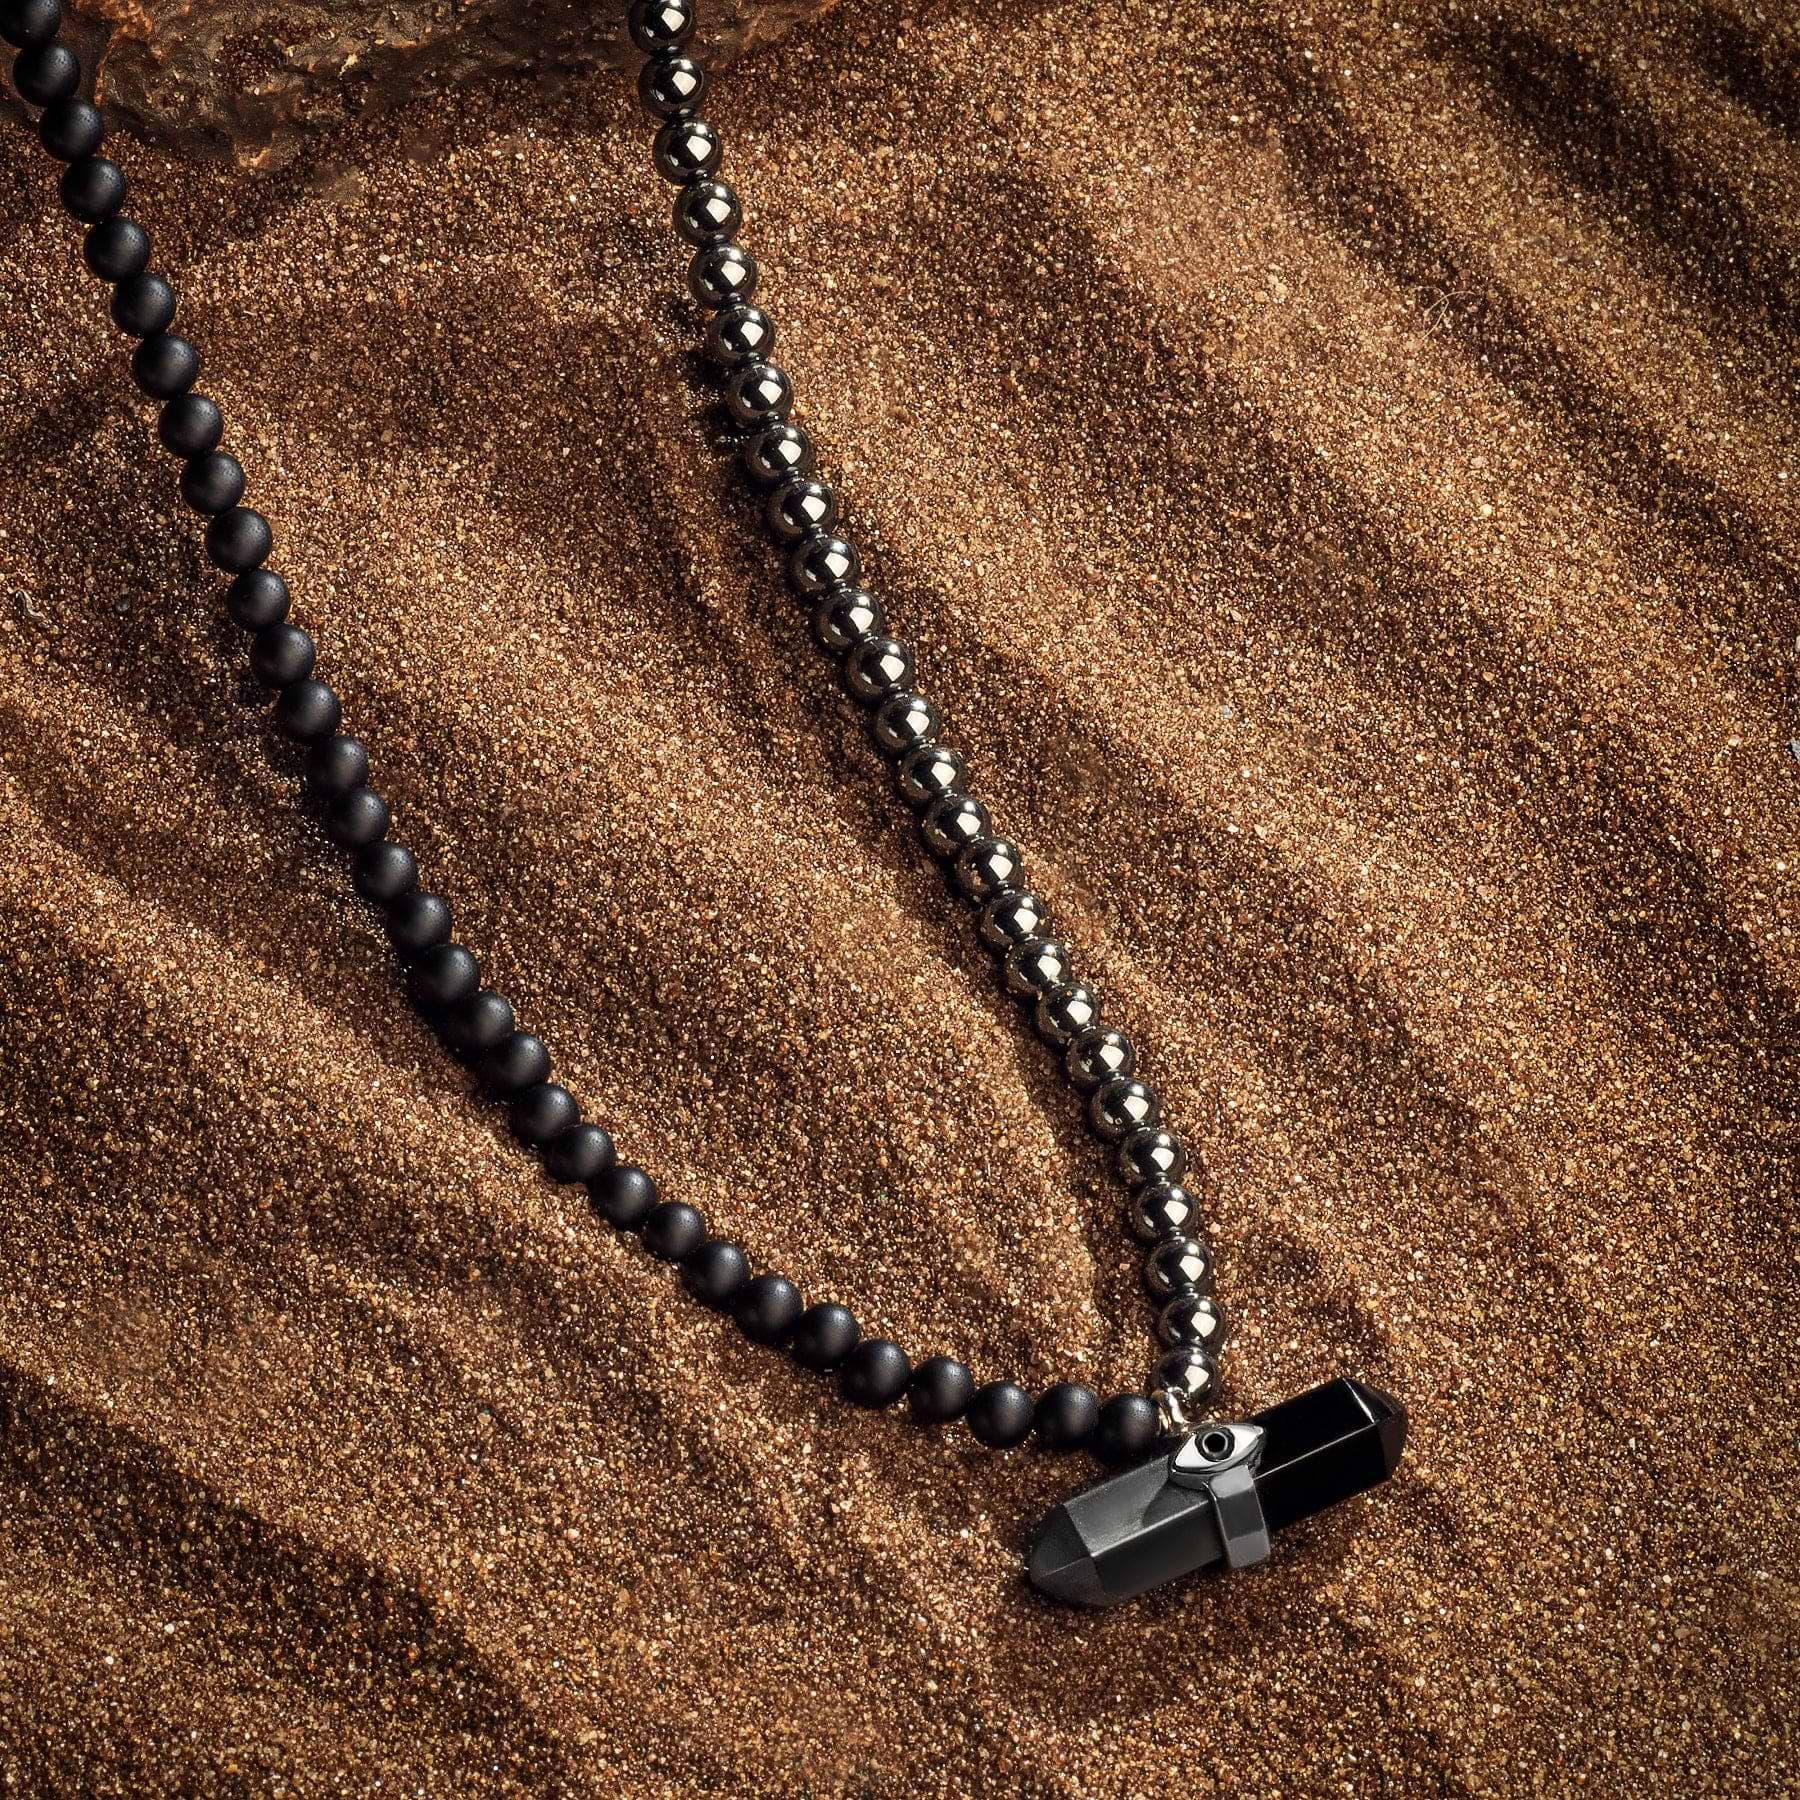 Karma and Luck  Necklaces - Mens  -  Hematite & Onyx Rhodium Pinter necklace